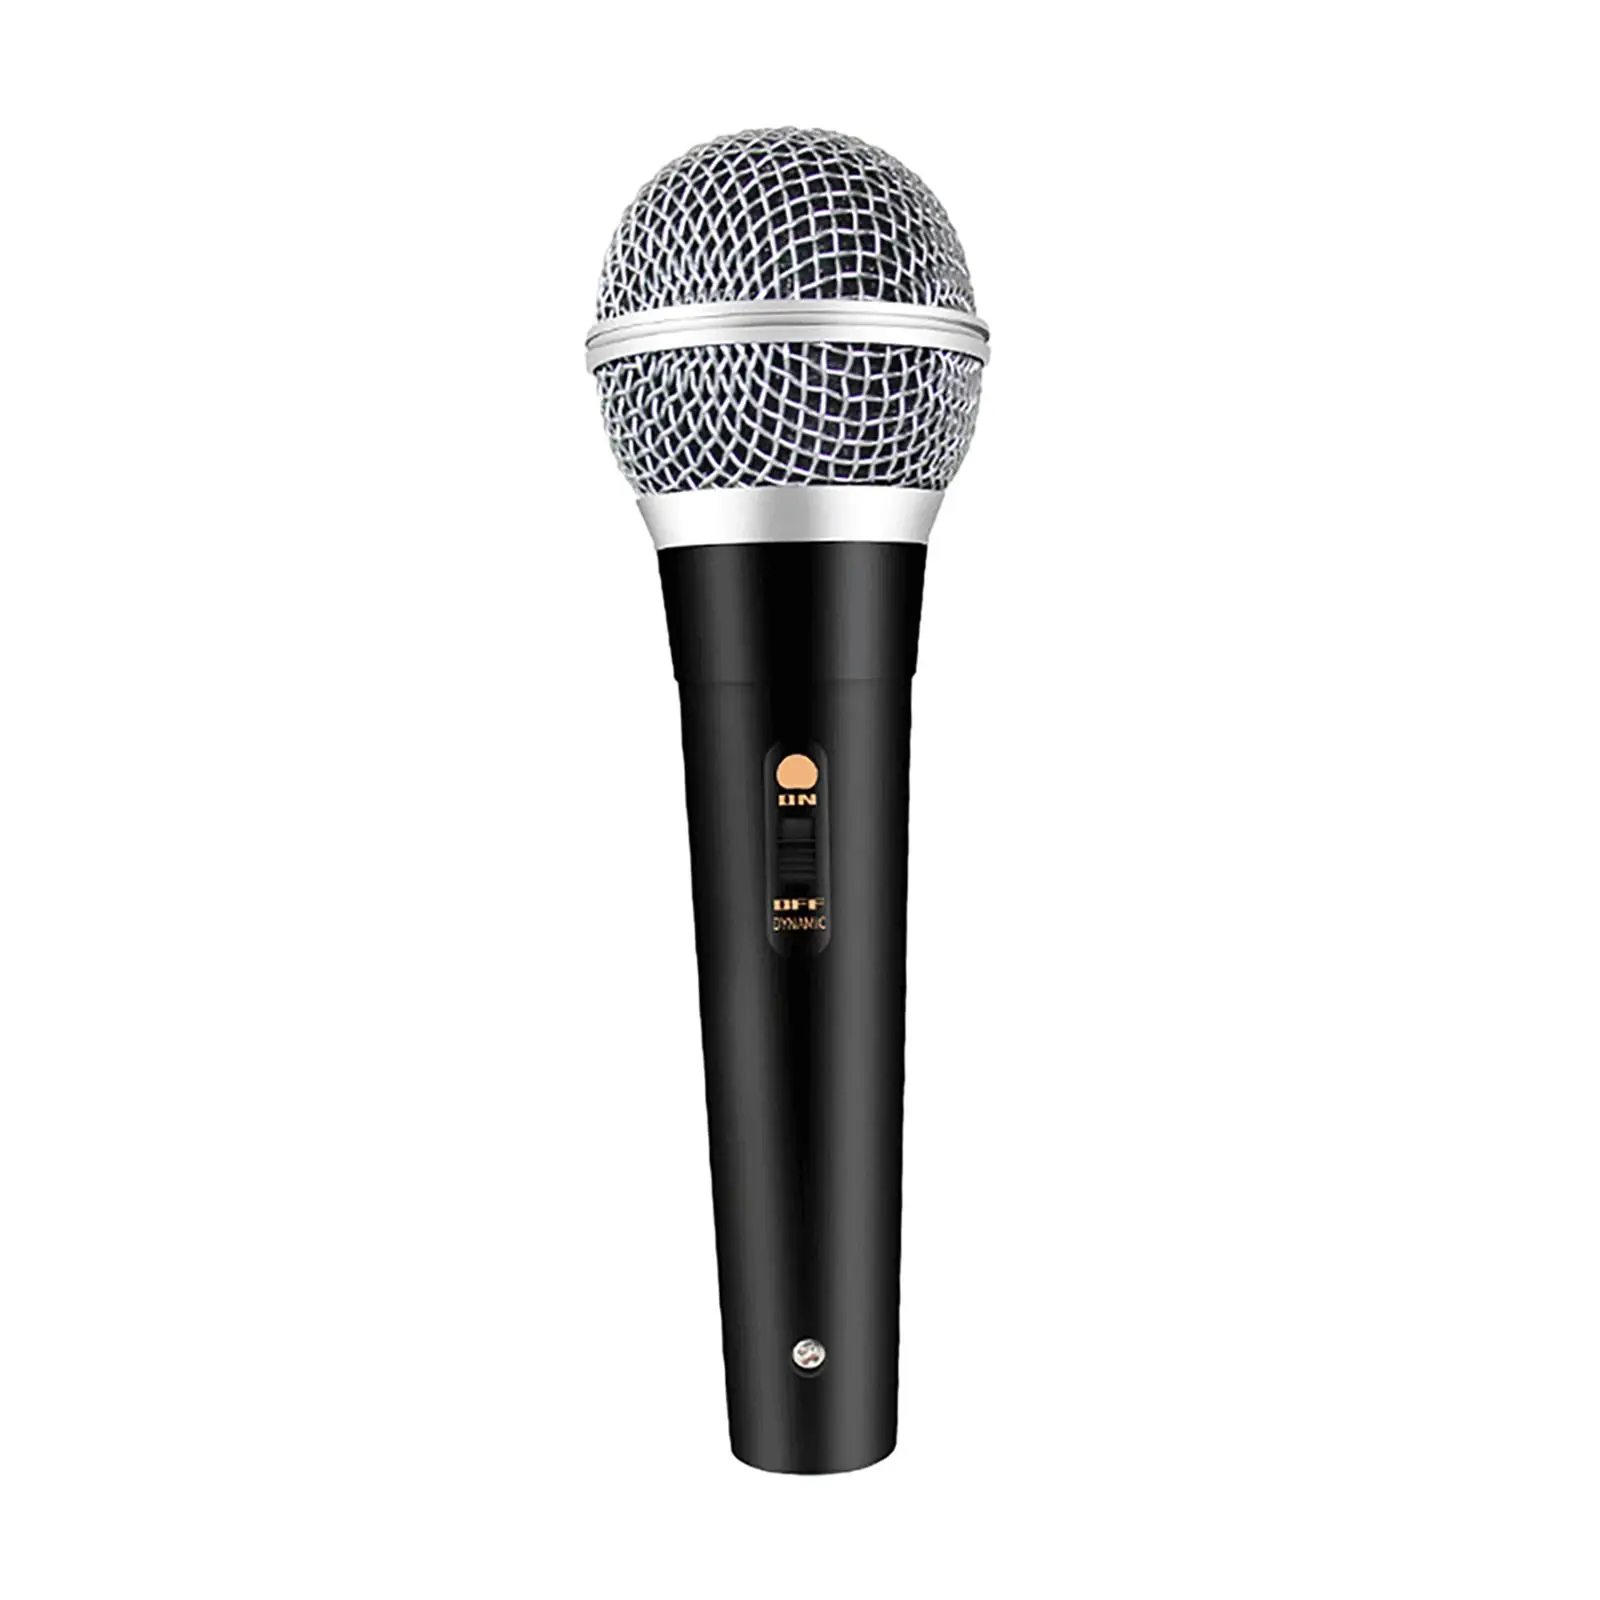 Handheld Wired Dynamic Mic Microphone Cardioid Pickup Pattern with on and Off Switch 300cm Cord for Wedding DJ Lightweight